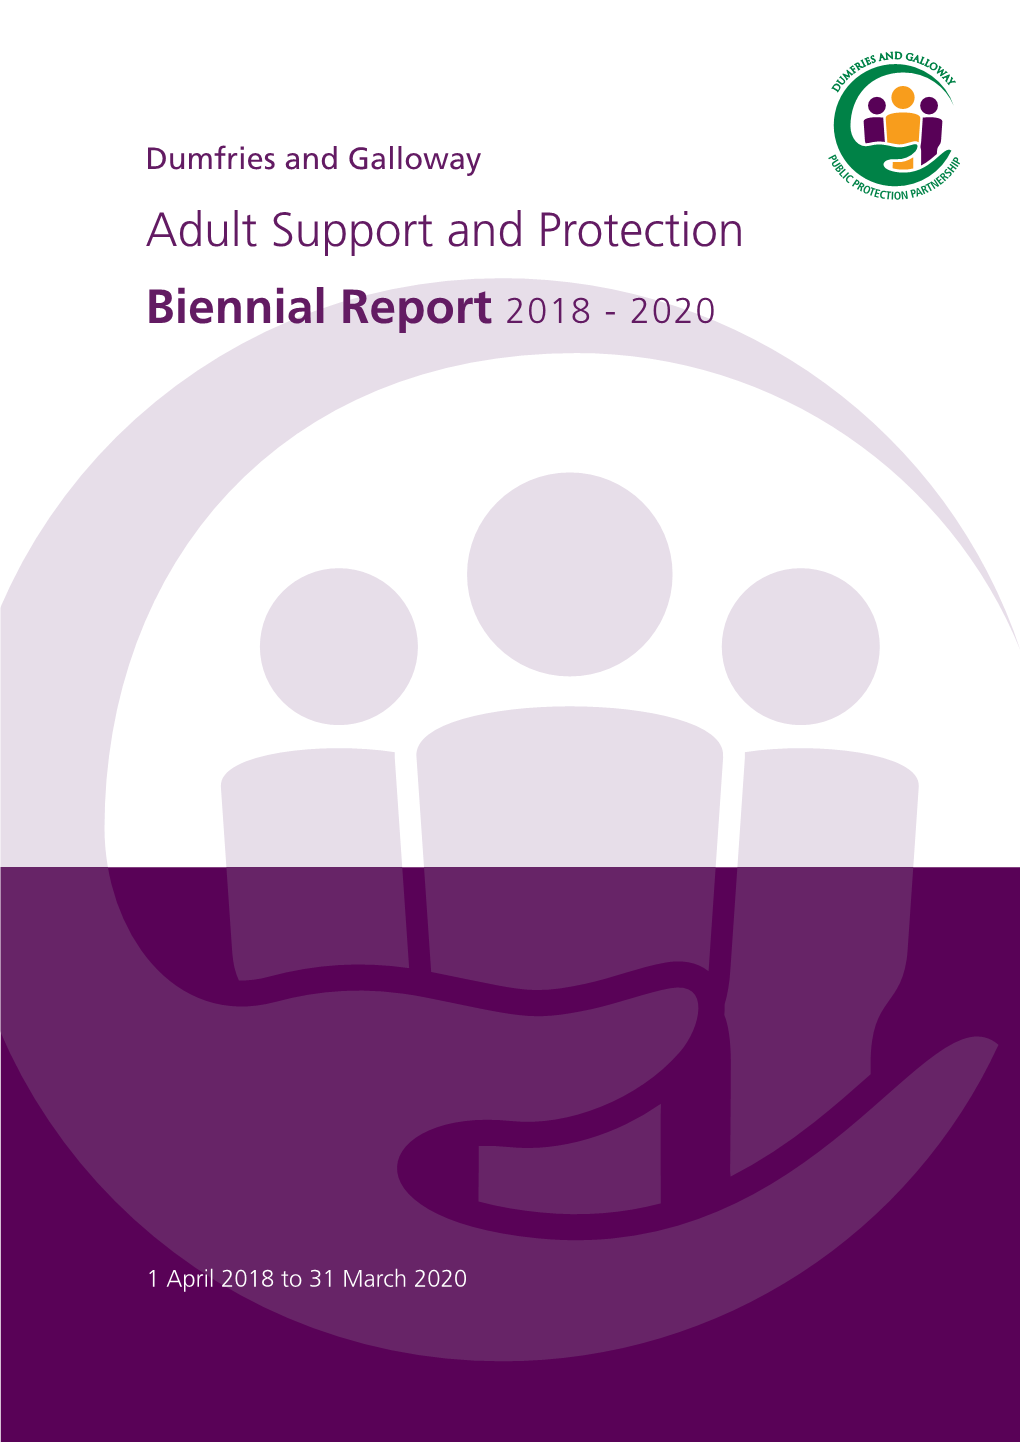 Adult Support and Protection Biennial Report 2018 - 2020